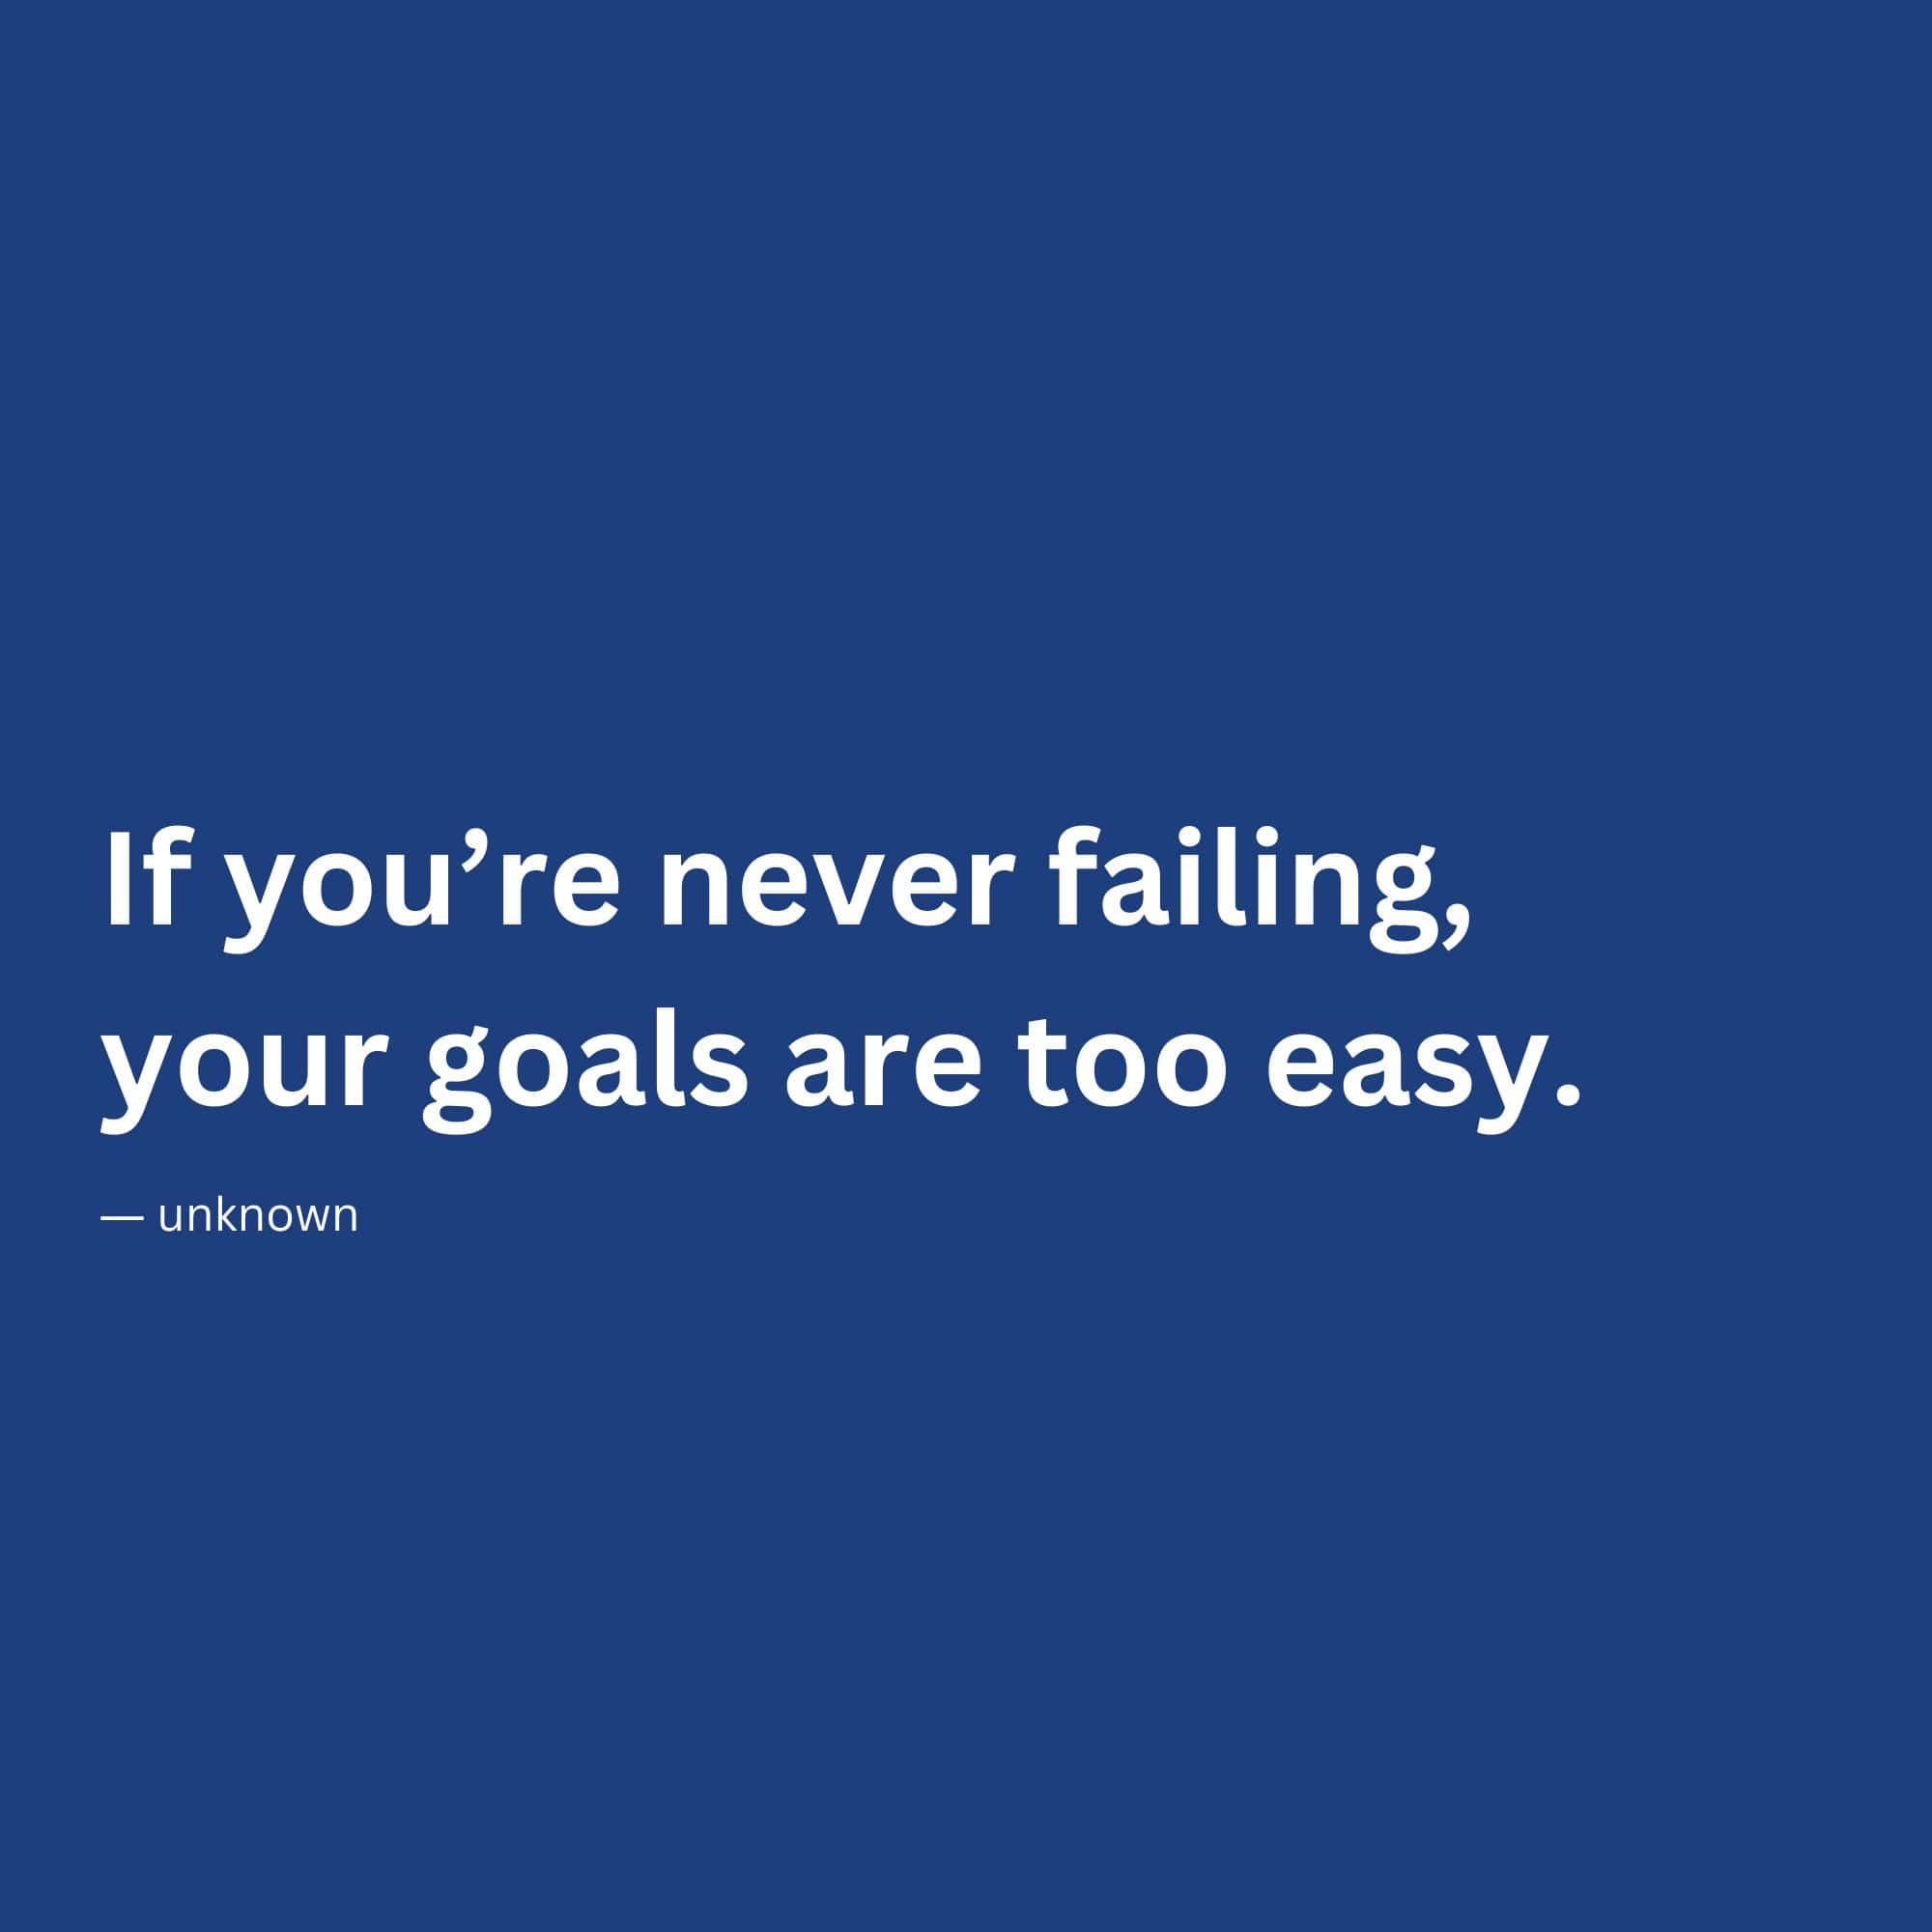 “If you’re never failing, your goals are too easy.”